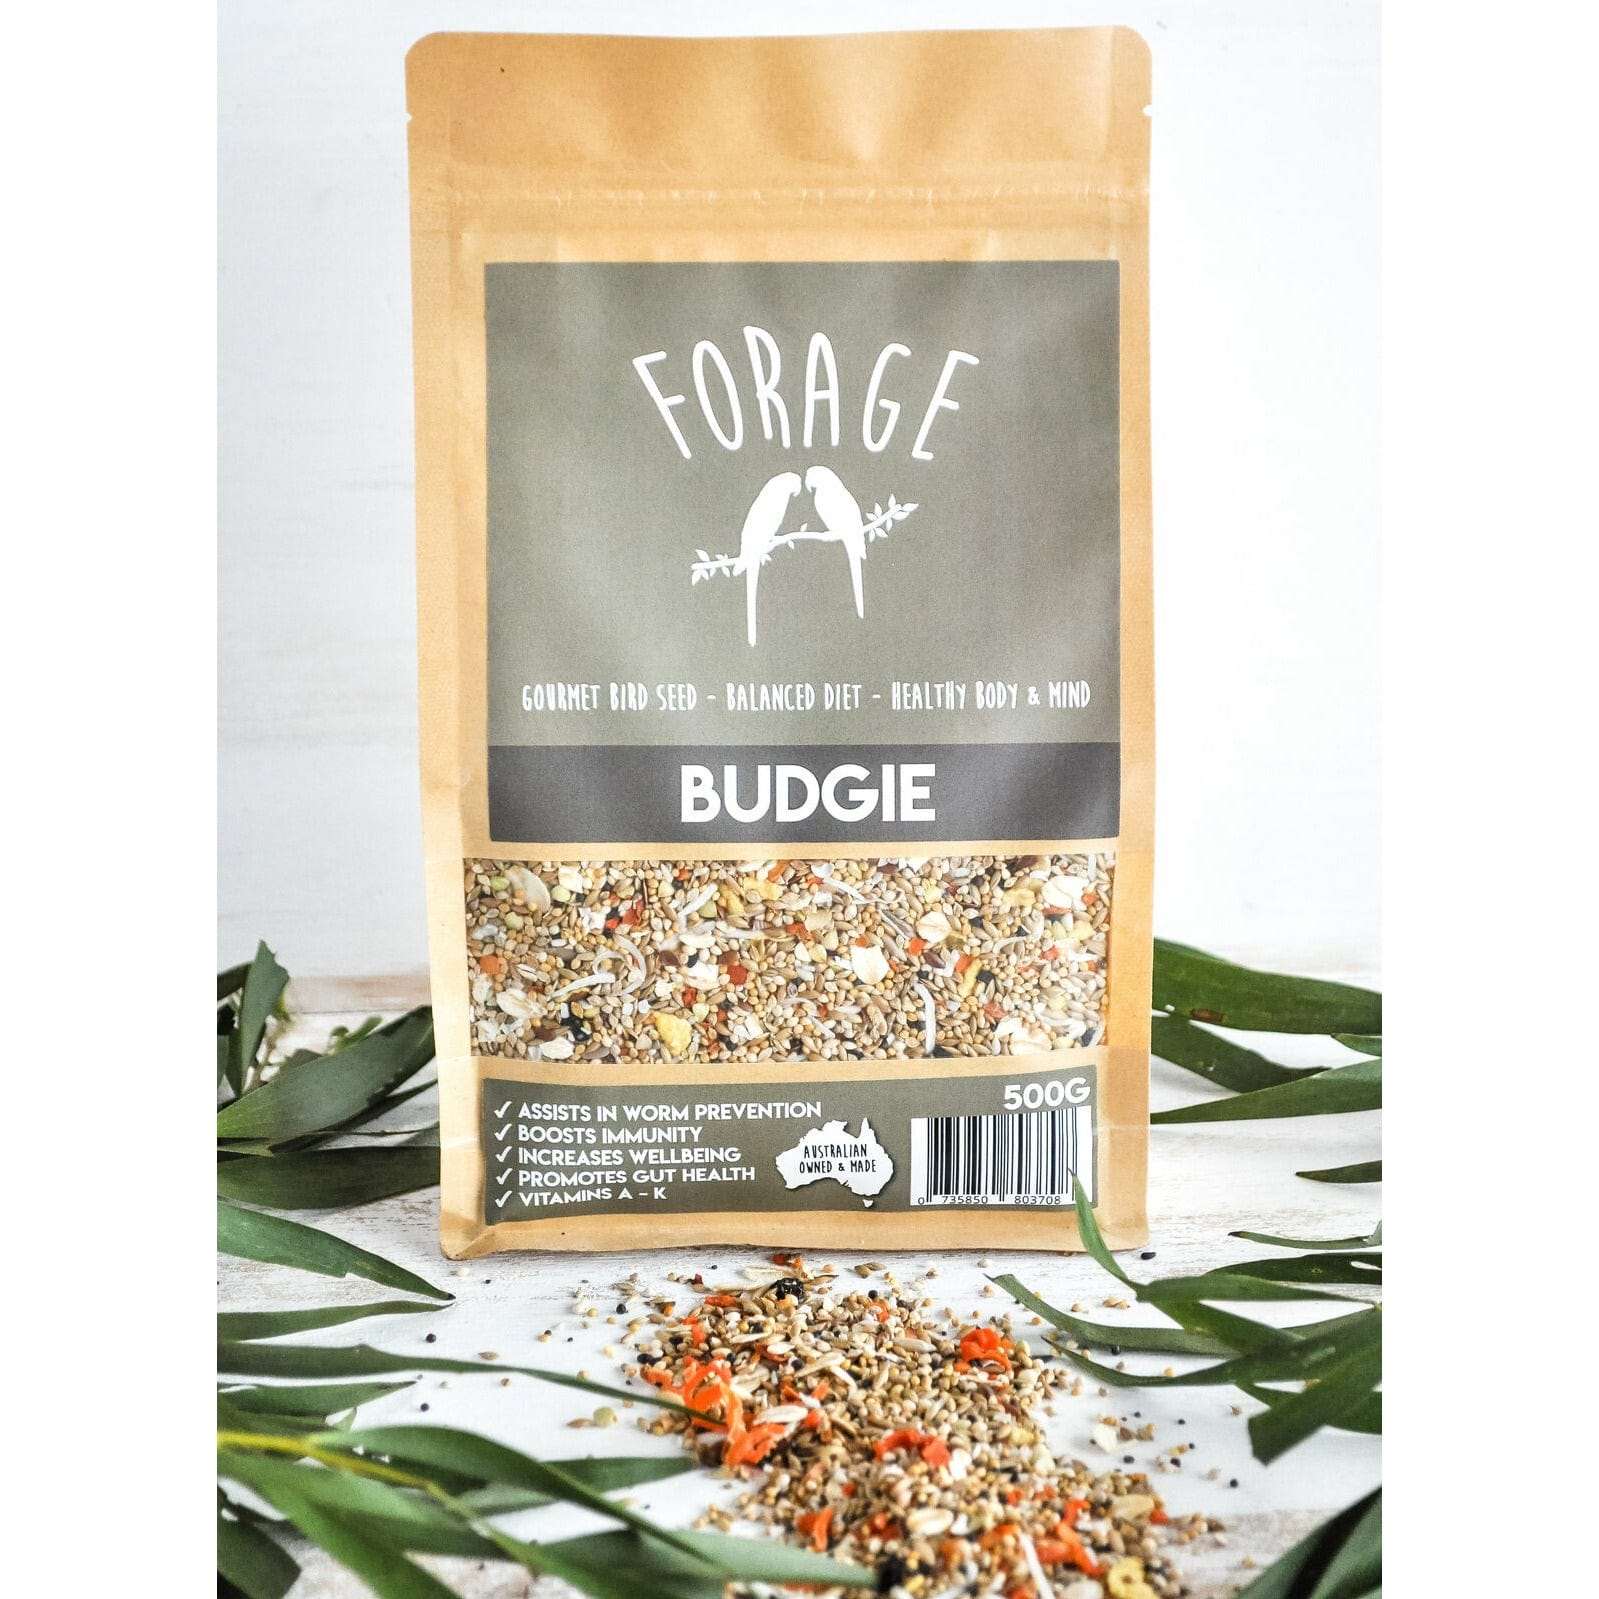 Forage Budgie Mix (Excl. TAS & WA) from Forage Gourmet Seed